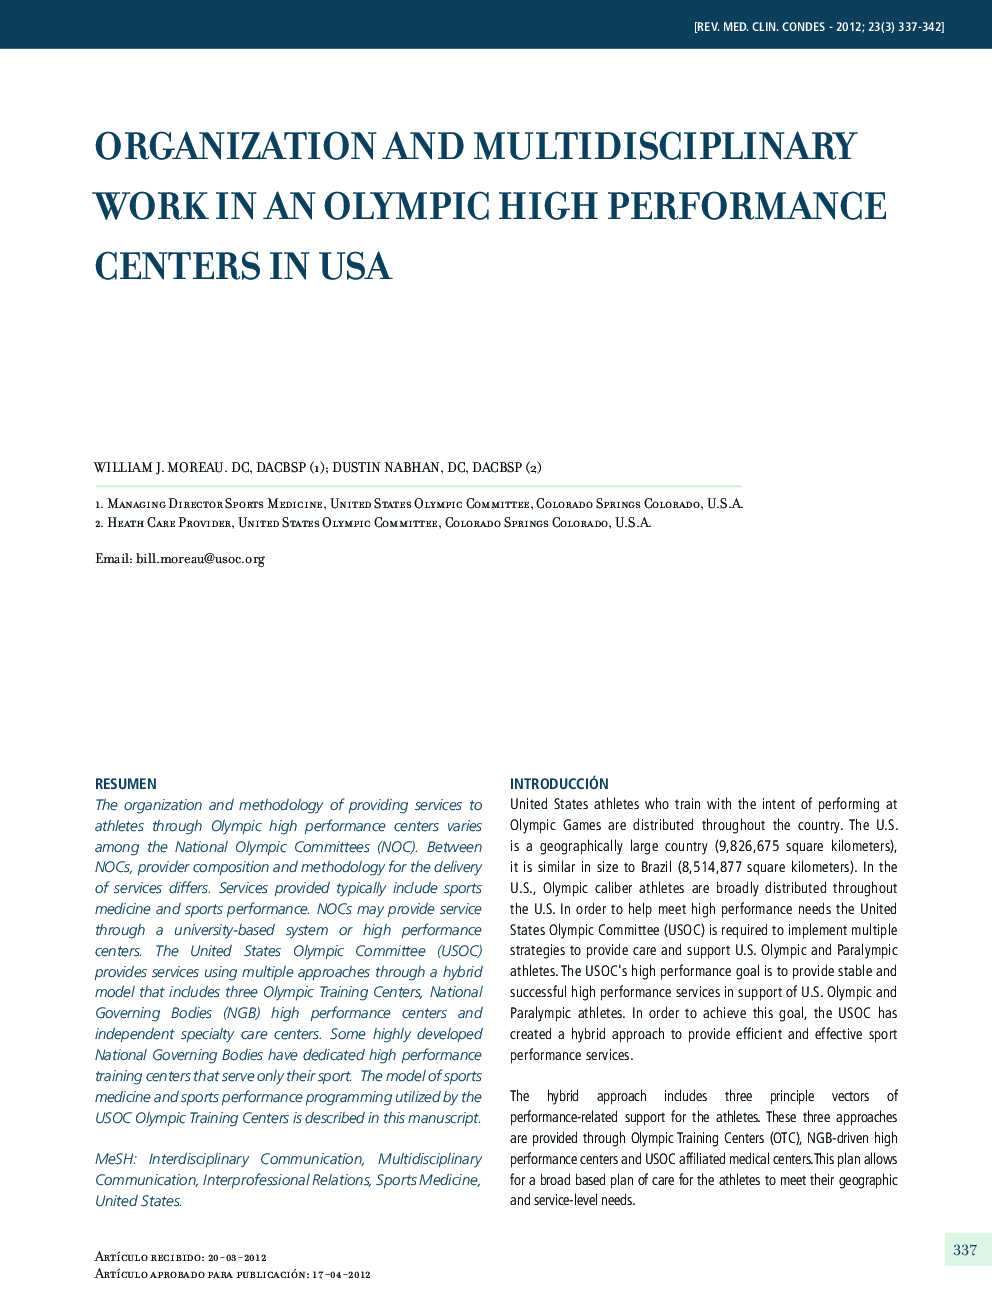 Organization and multidisciplinary work in an olympic high performance centers in USA